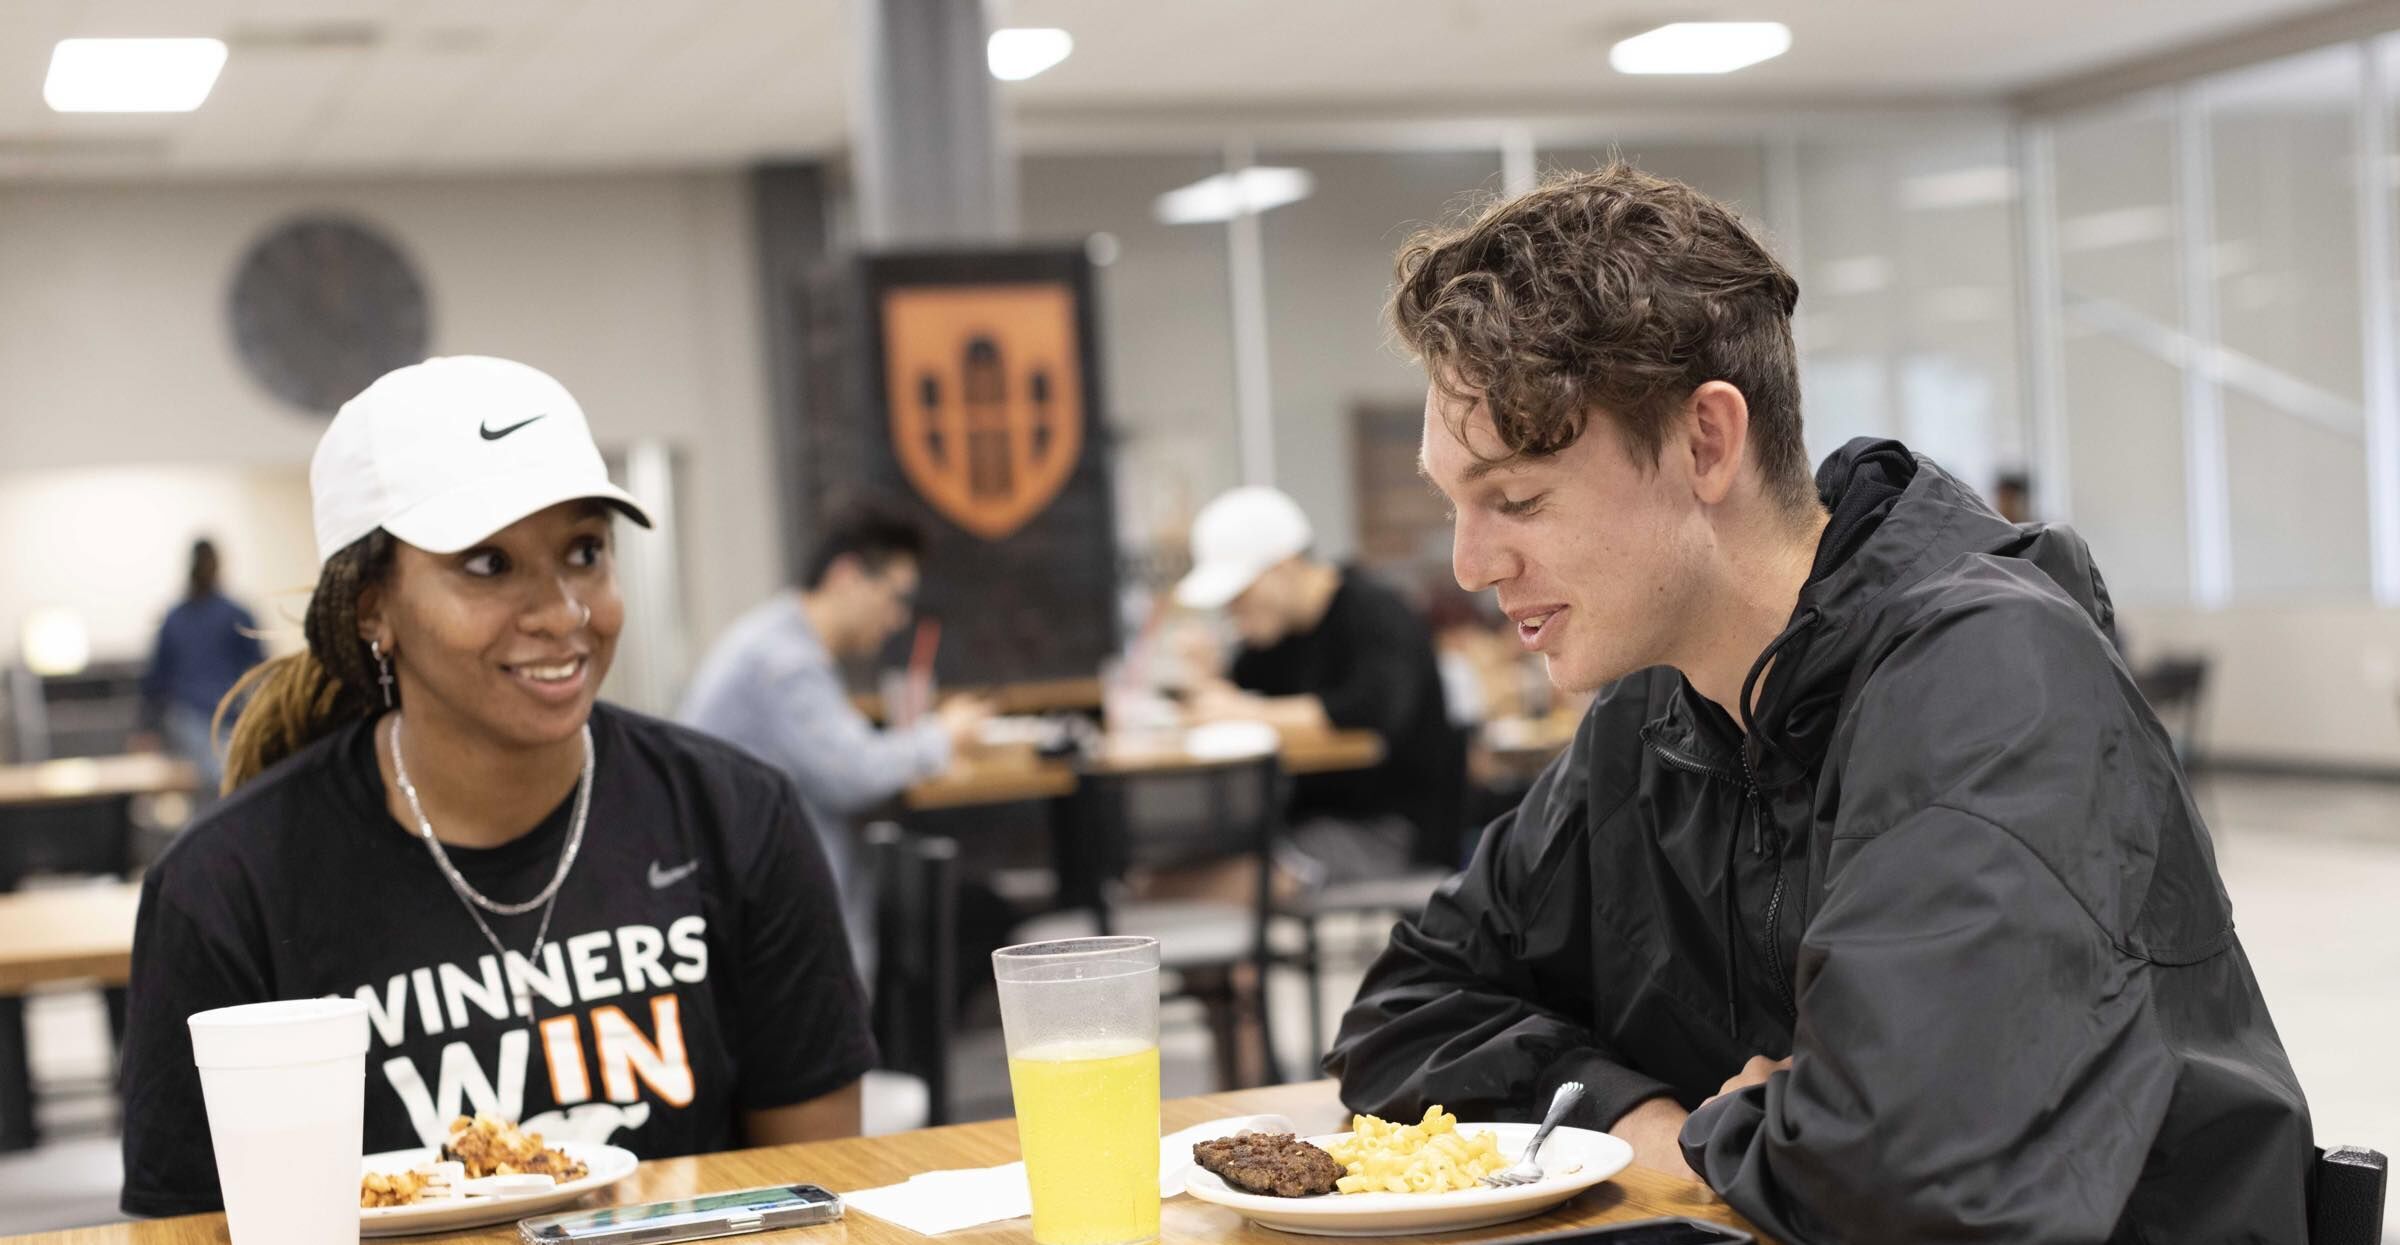 Students in dining hall